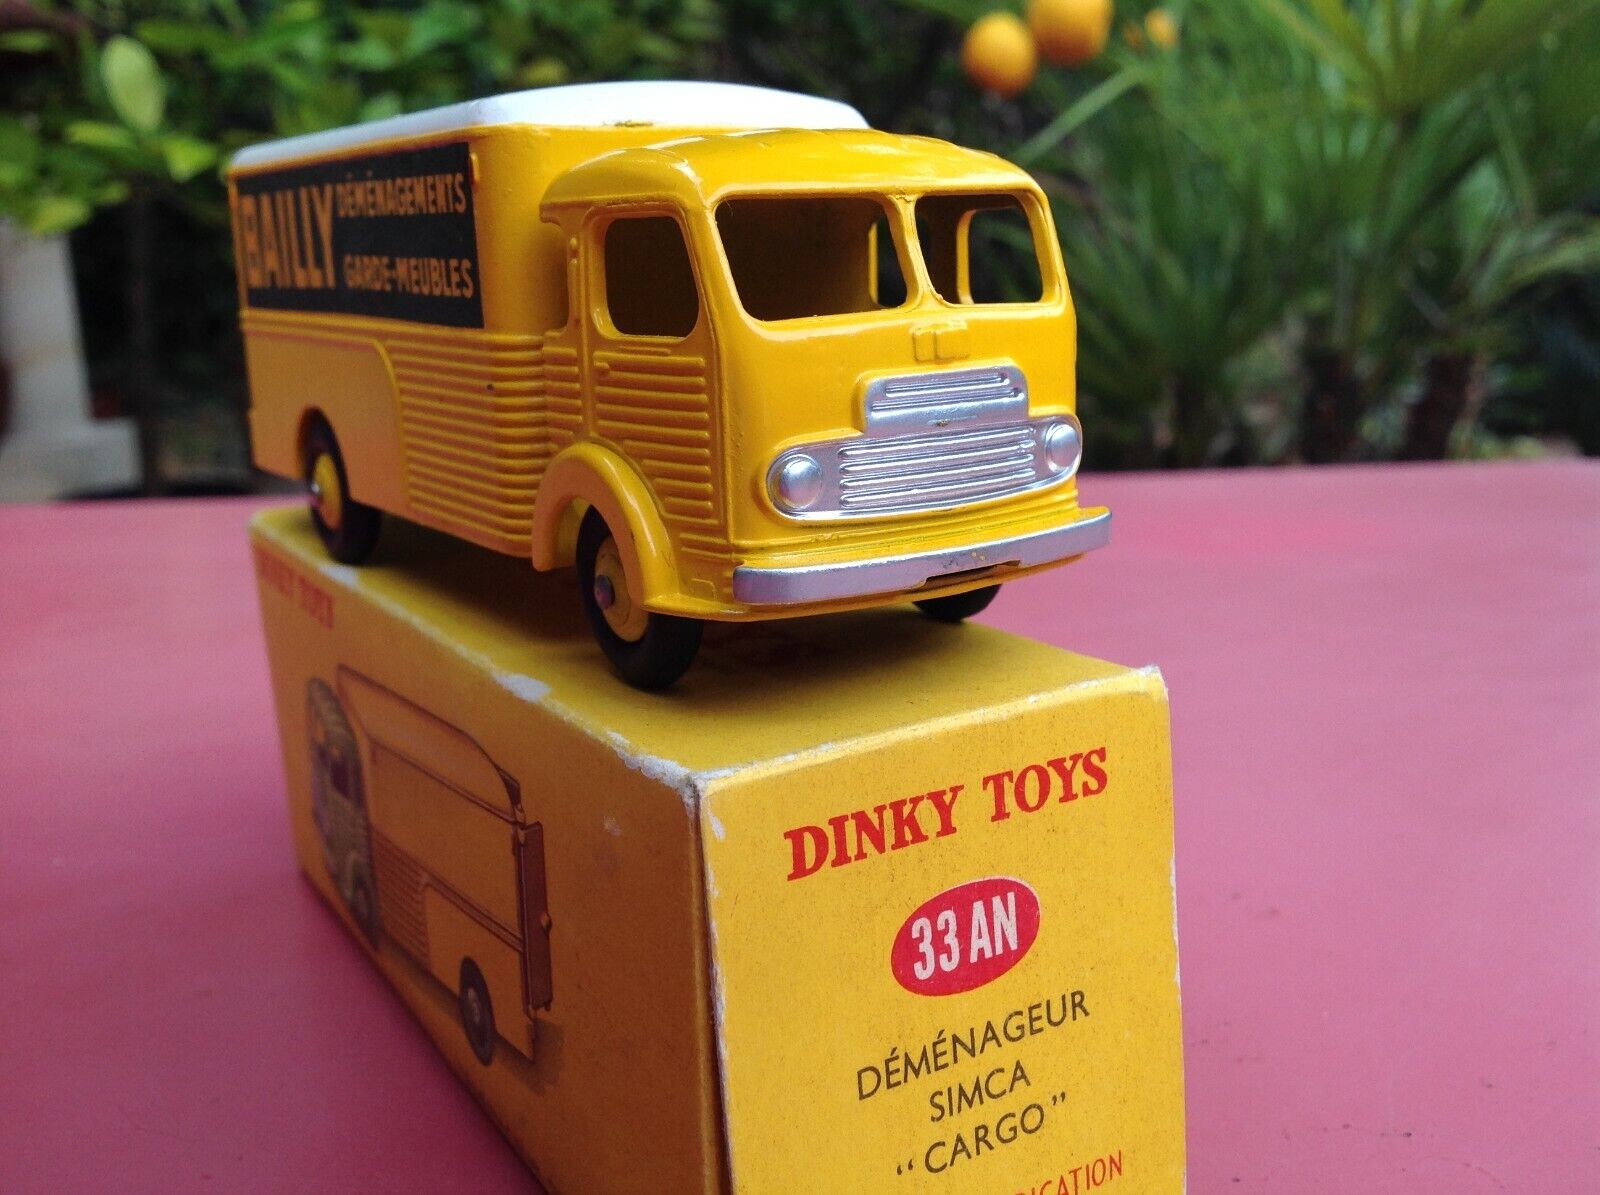 Dinky toys ref 33an simca cargo Bailly mint box near very clo Under blast sales Max 52% OFF in